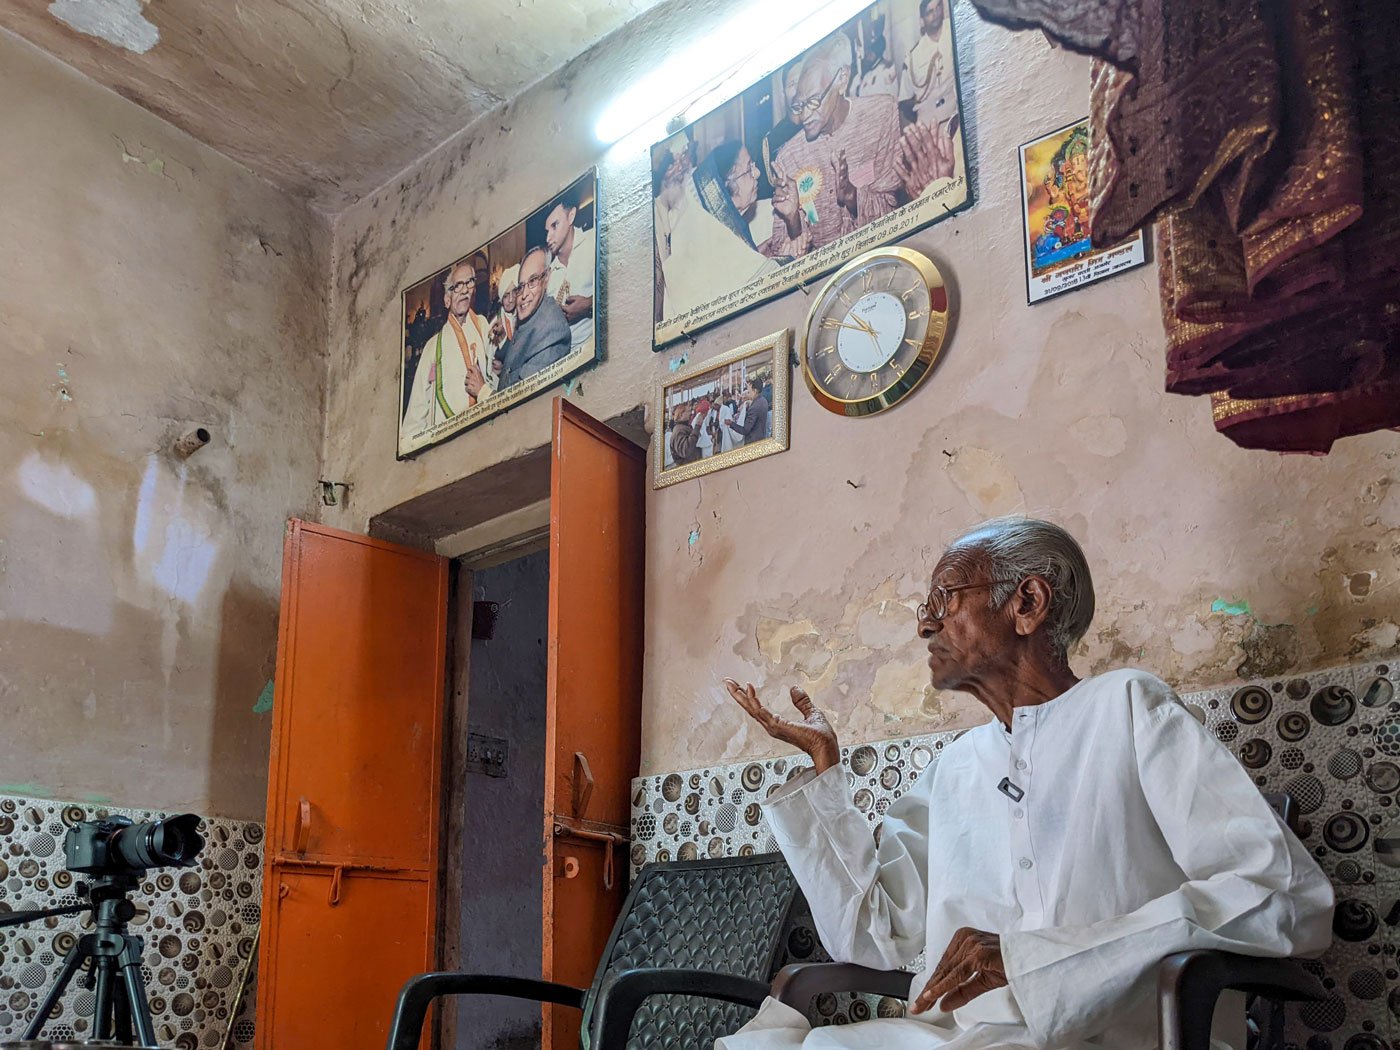 ‘Don’t ask me about exact dates,’ says Shobharam. ‘I once had everything, all my documents, all my notes and records, right in this house. There was a flood here in 1975 and I lost everything'